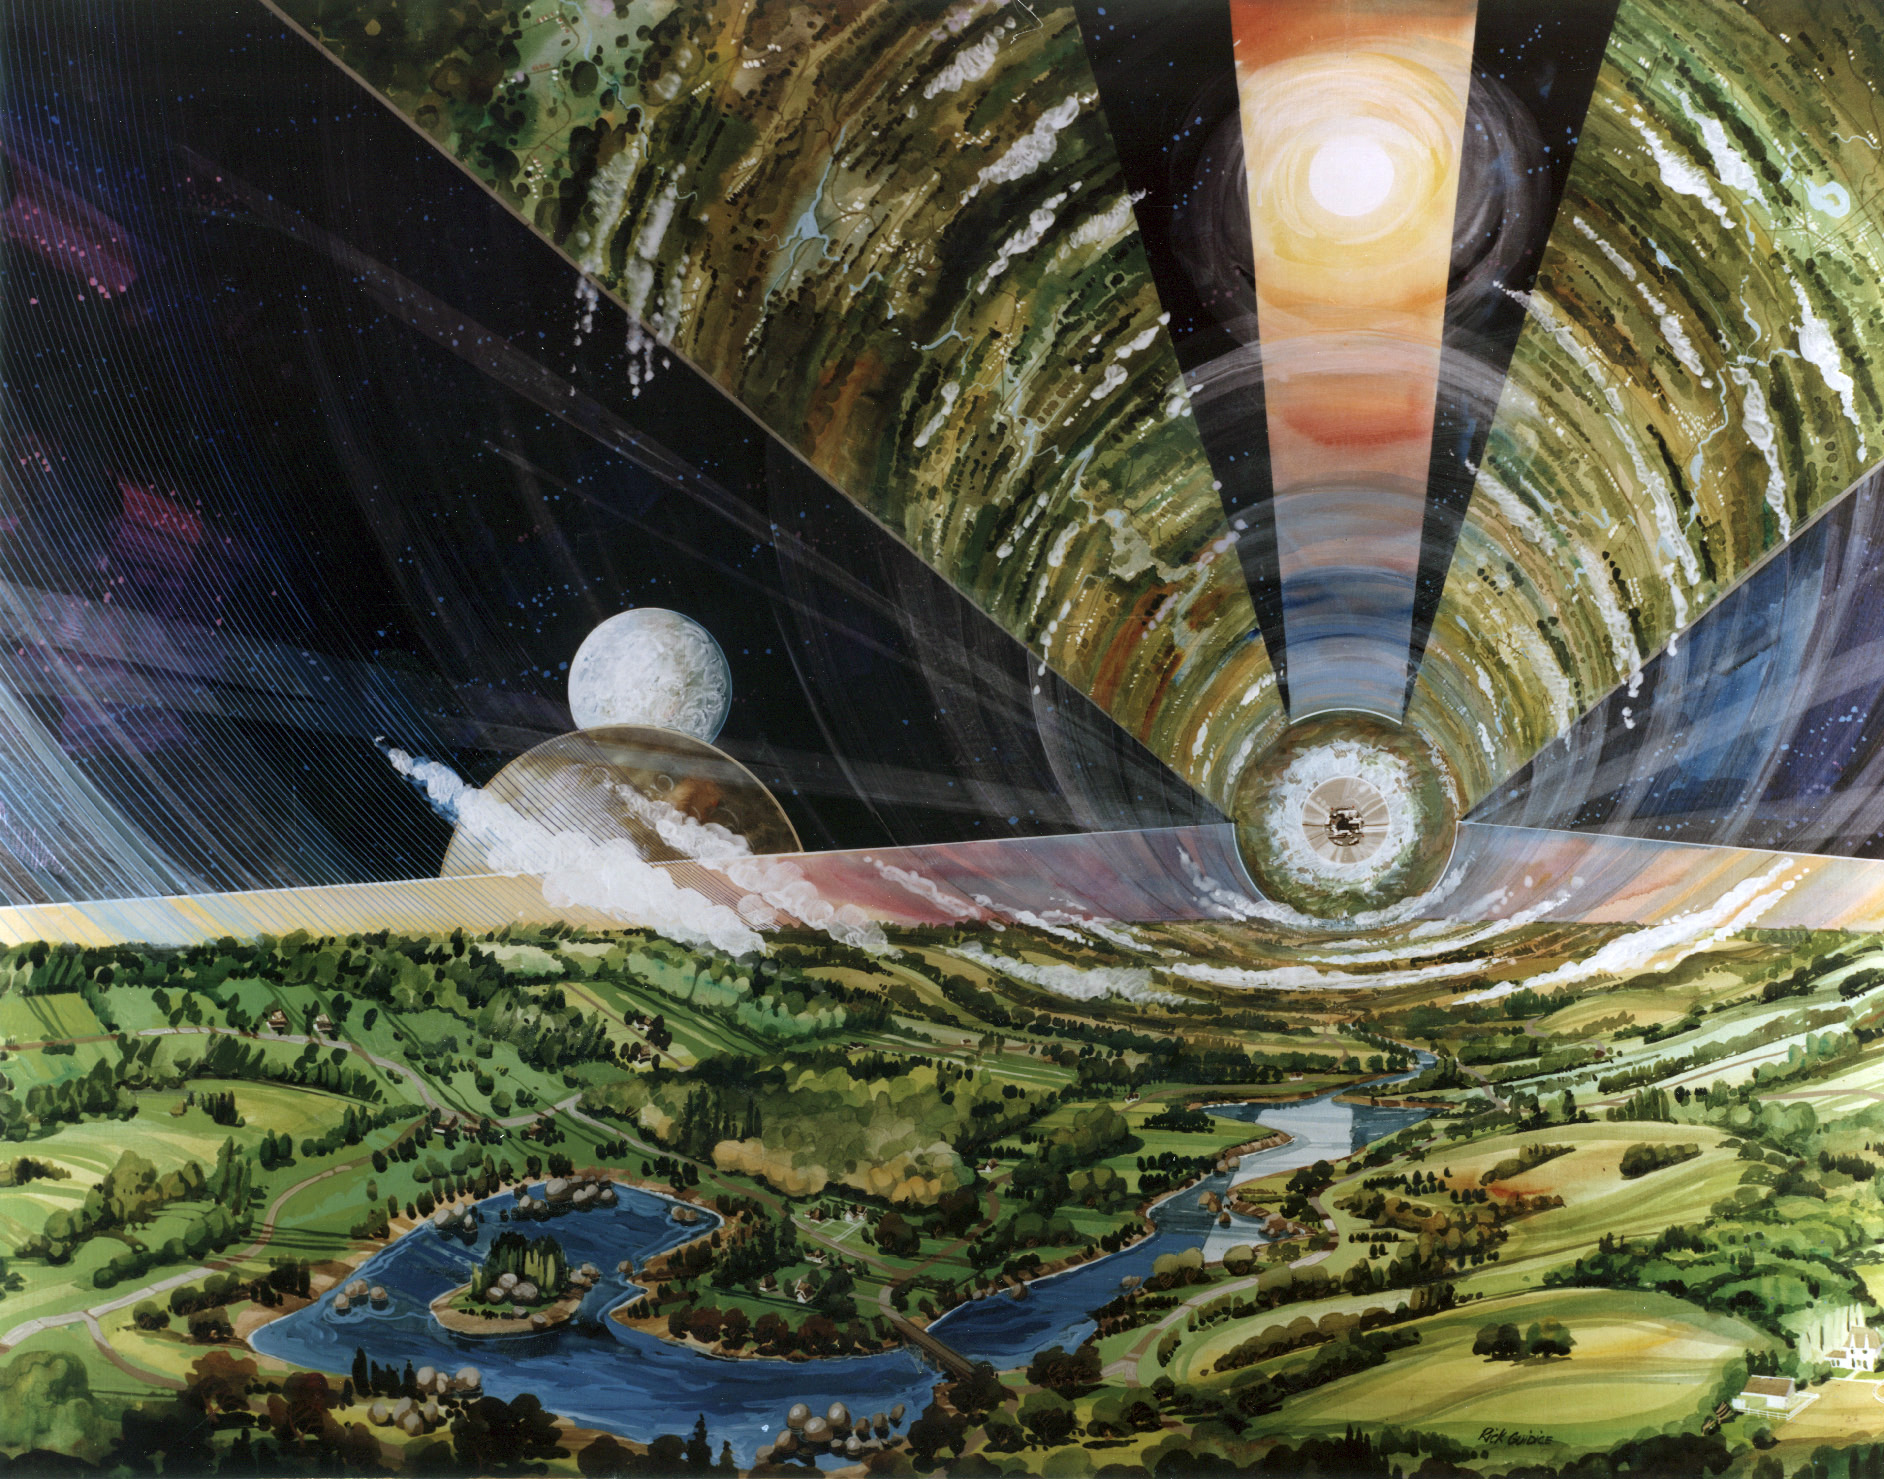 An artist's impression of the interior of Rama.